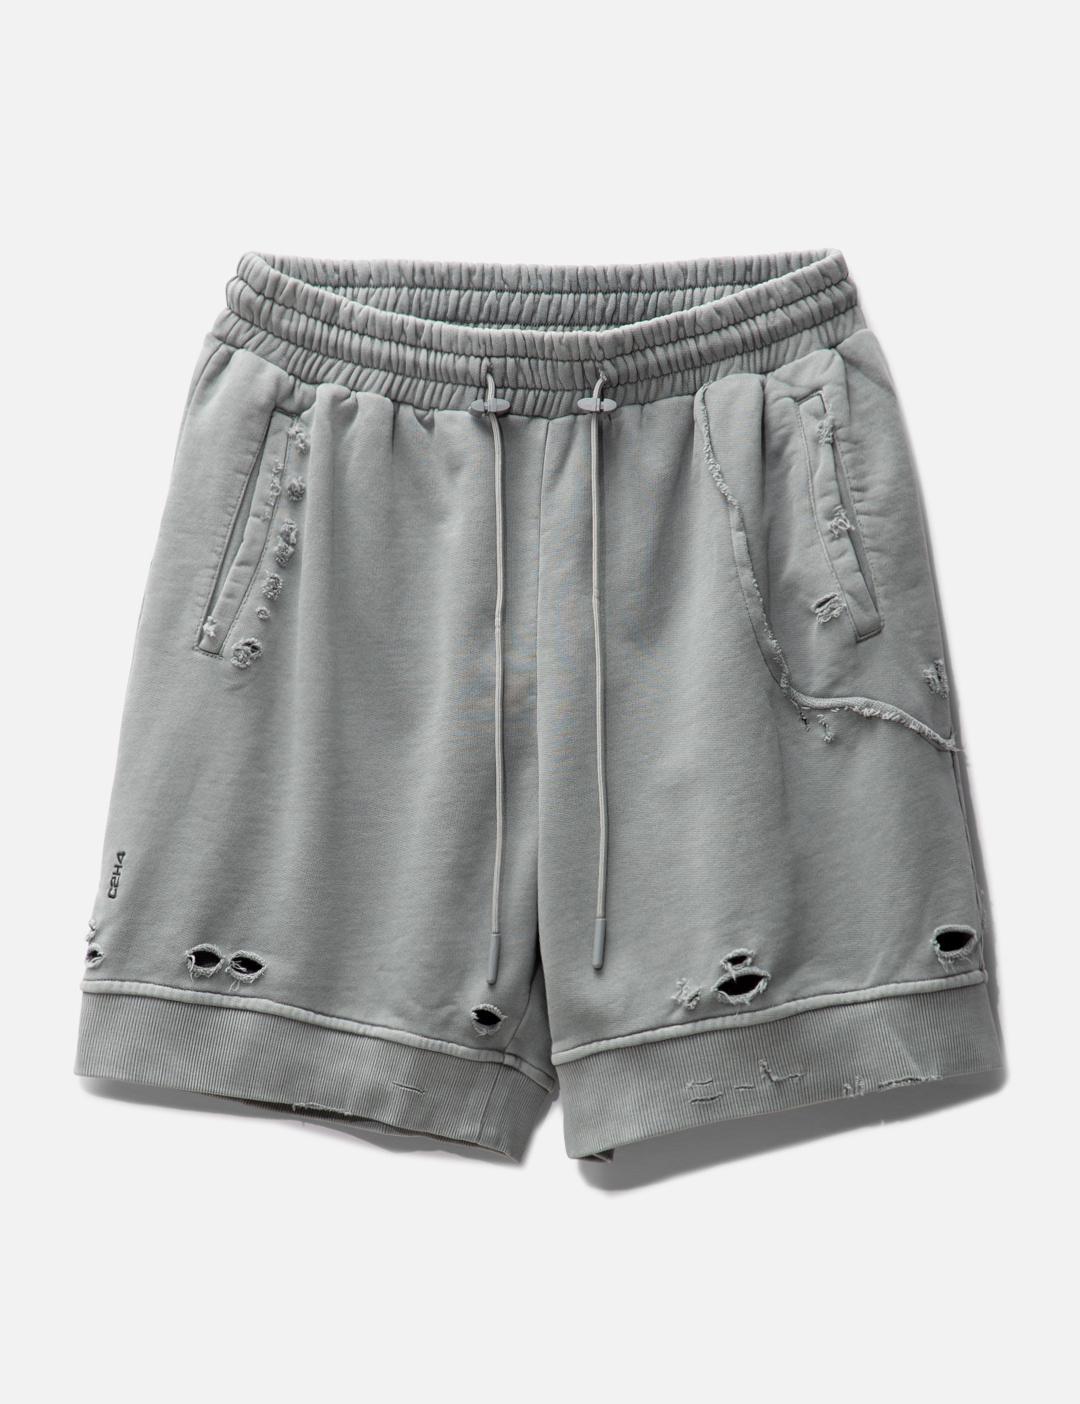 001-X - Ruin Distressed Sweat Shorts by C2H4